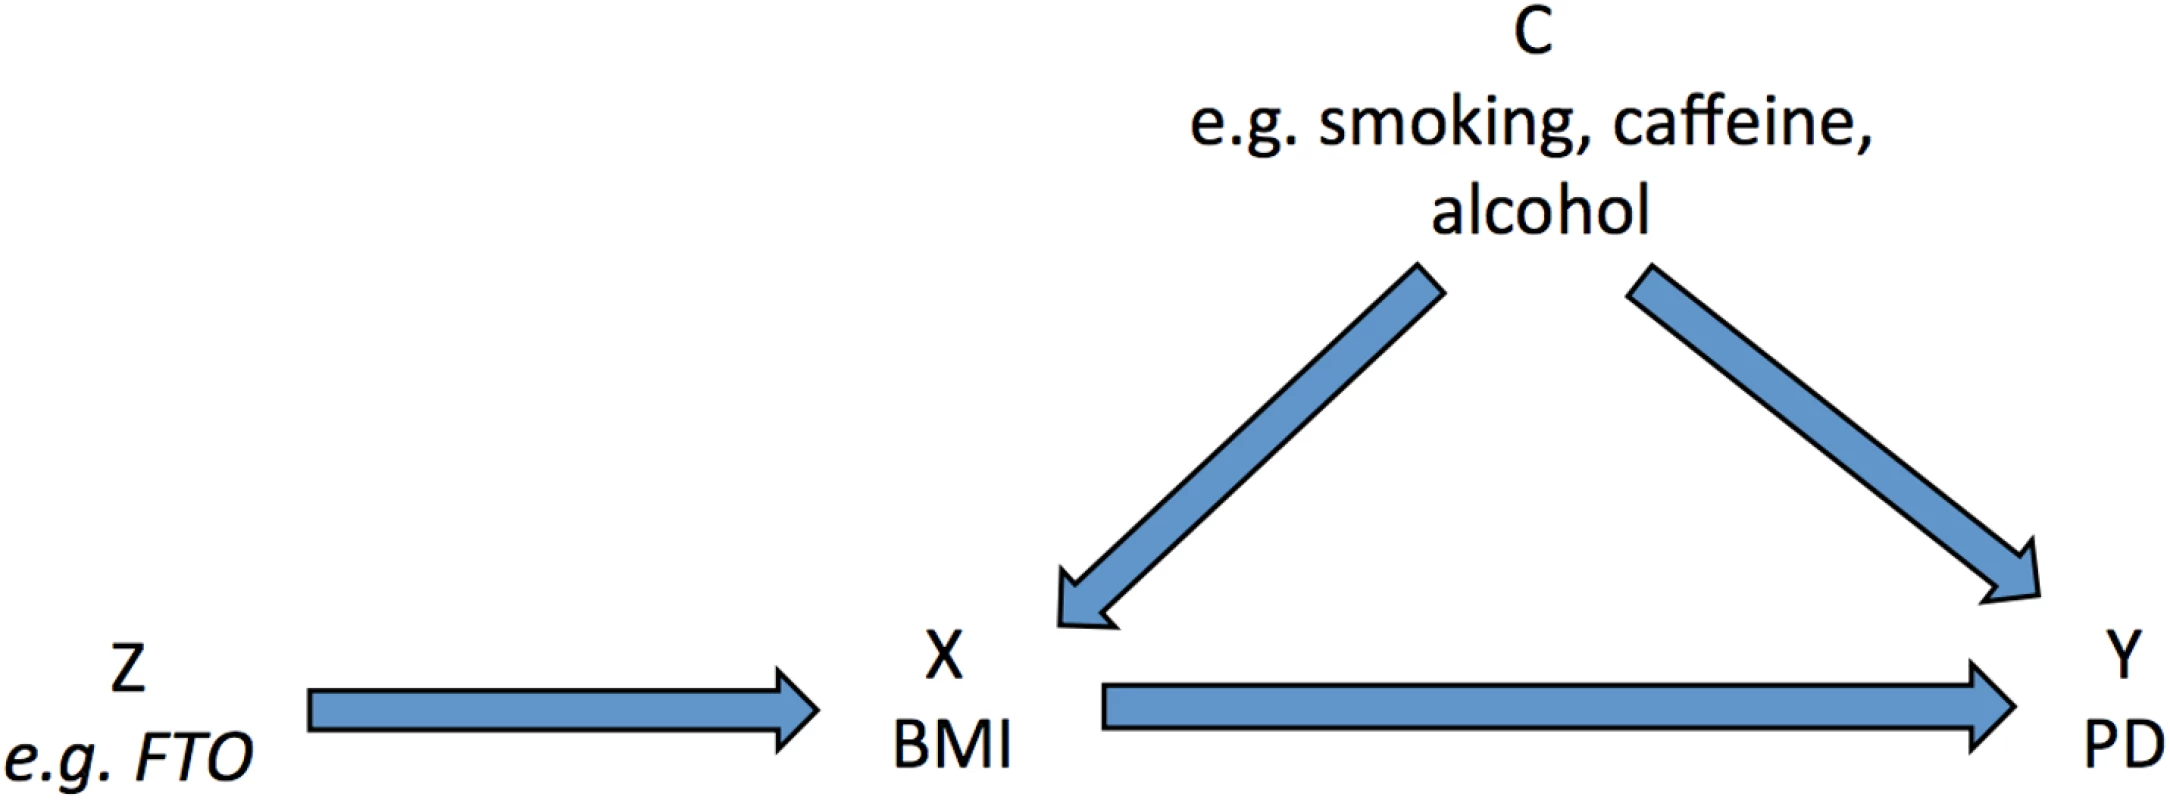 Directed acyclic graph of instrumental variable analysis using genetic variants as proxies for environmental exposures (adapted from Lawlor et al. [<em class=&quot;ref&quot;>14</em>]).